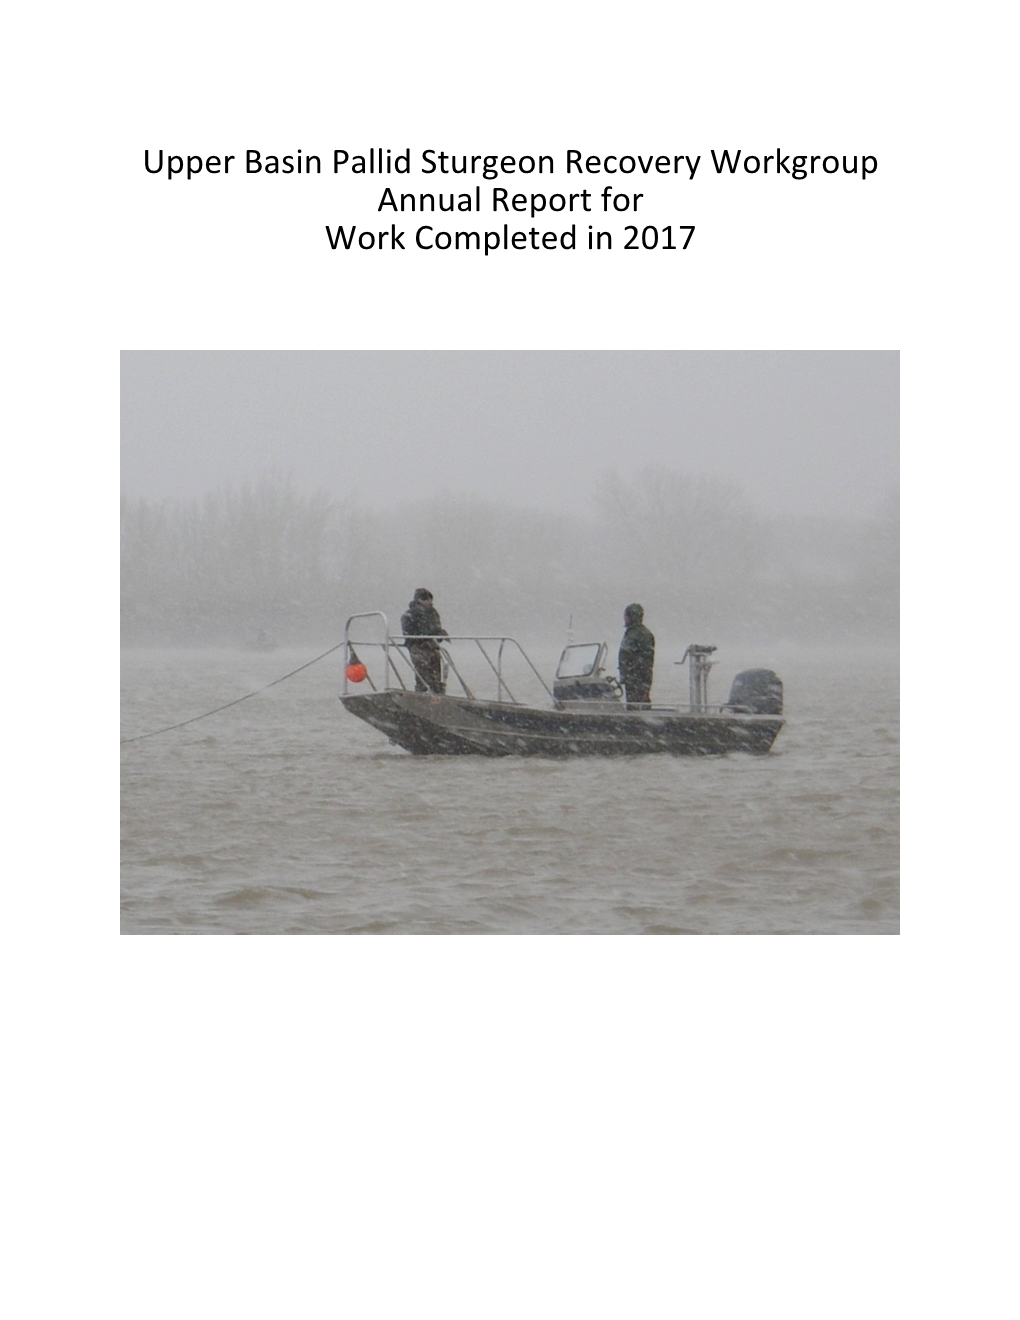 Upper Basin Pallid Sturgeon Recovery Workgroup Annual Report for Work Completed in 2017